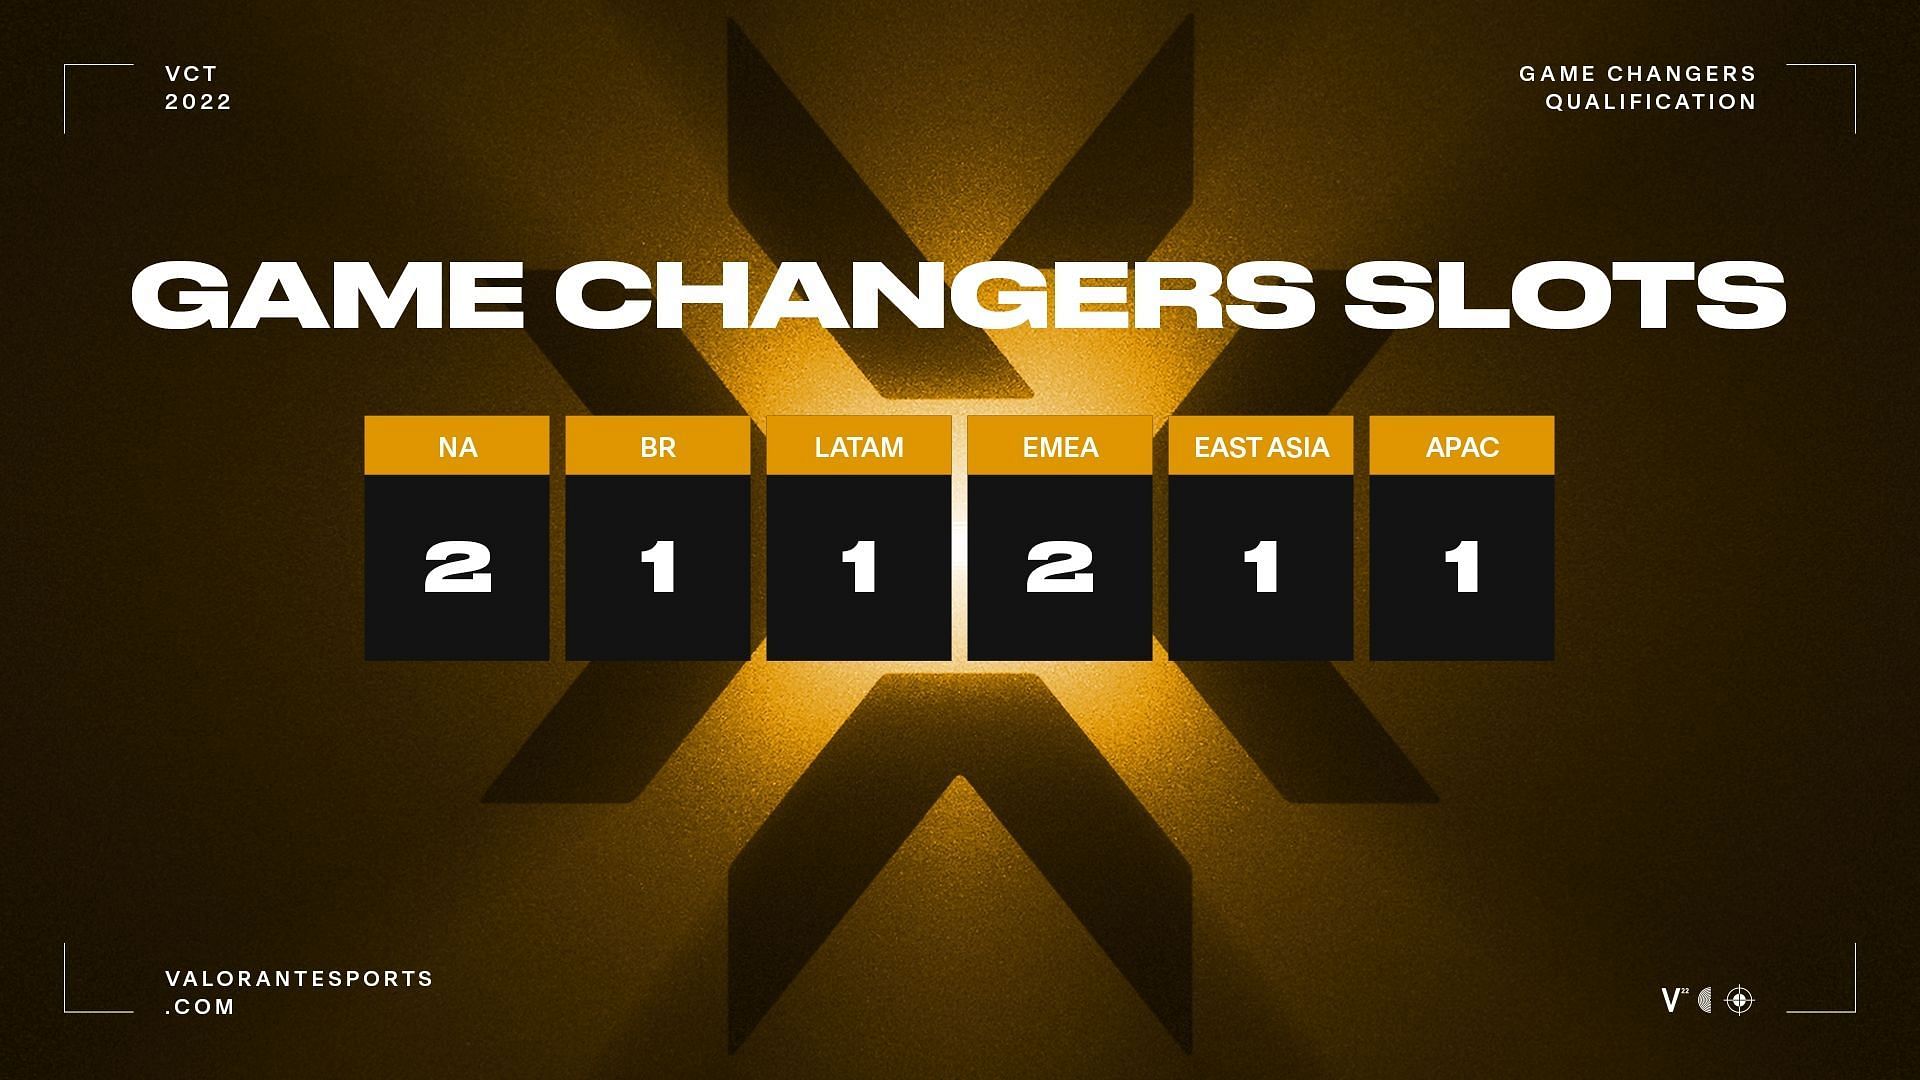 Valorant Game Changers 2022 Slots, starting time and more revealed